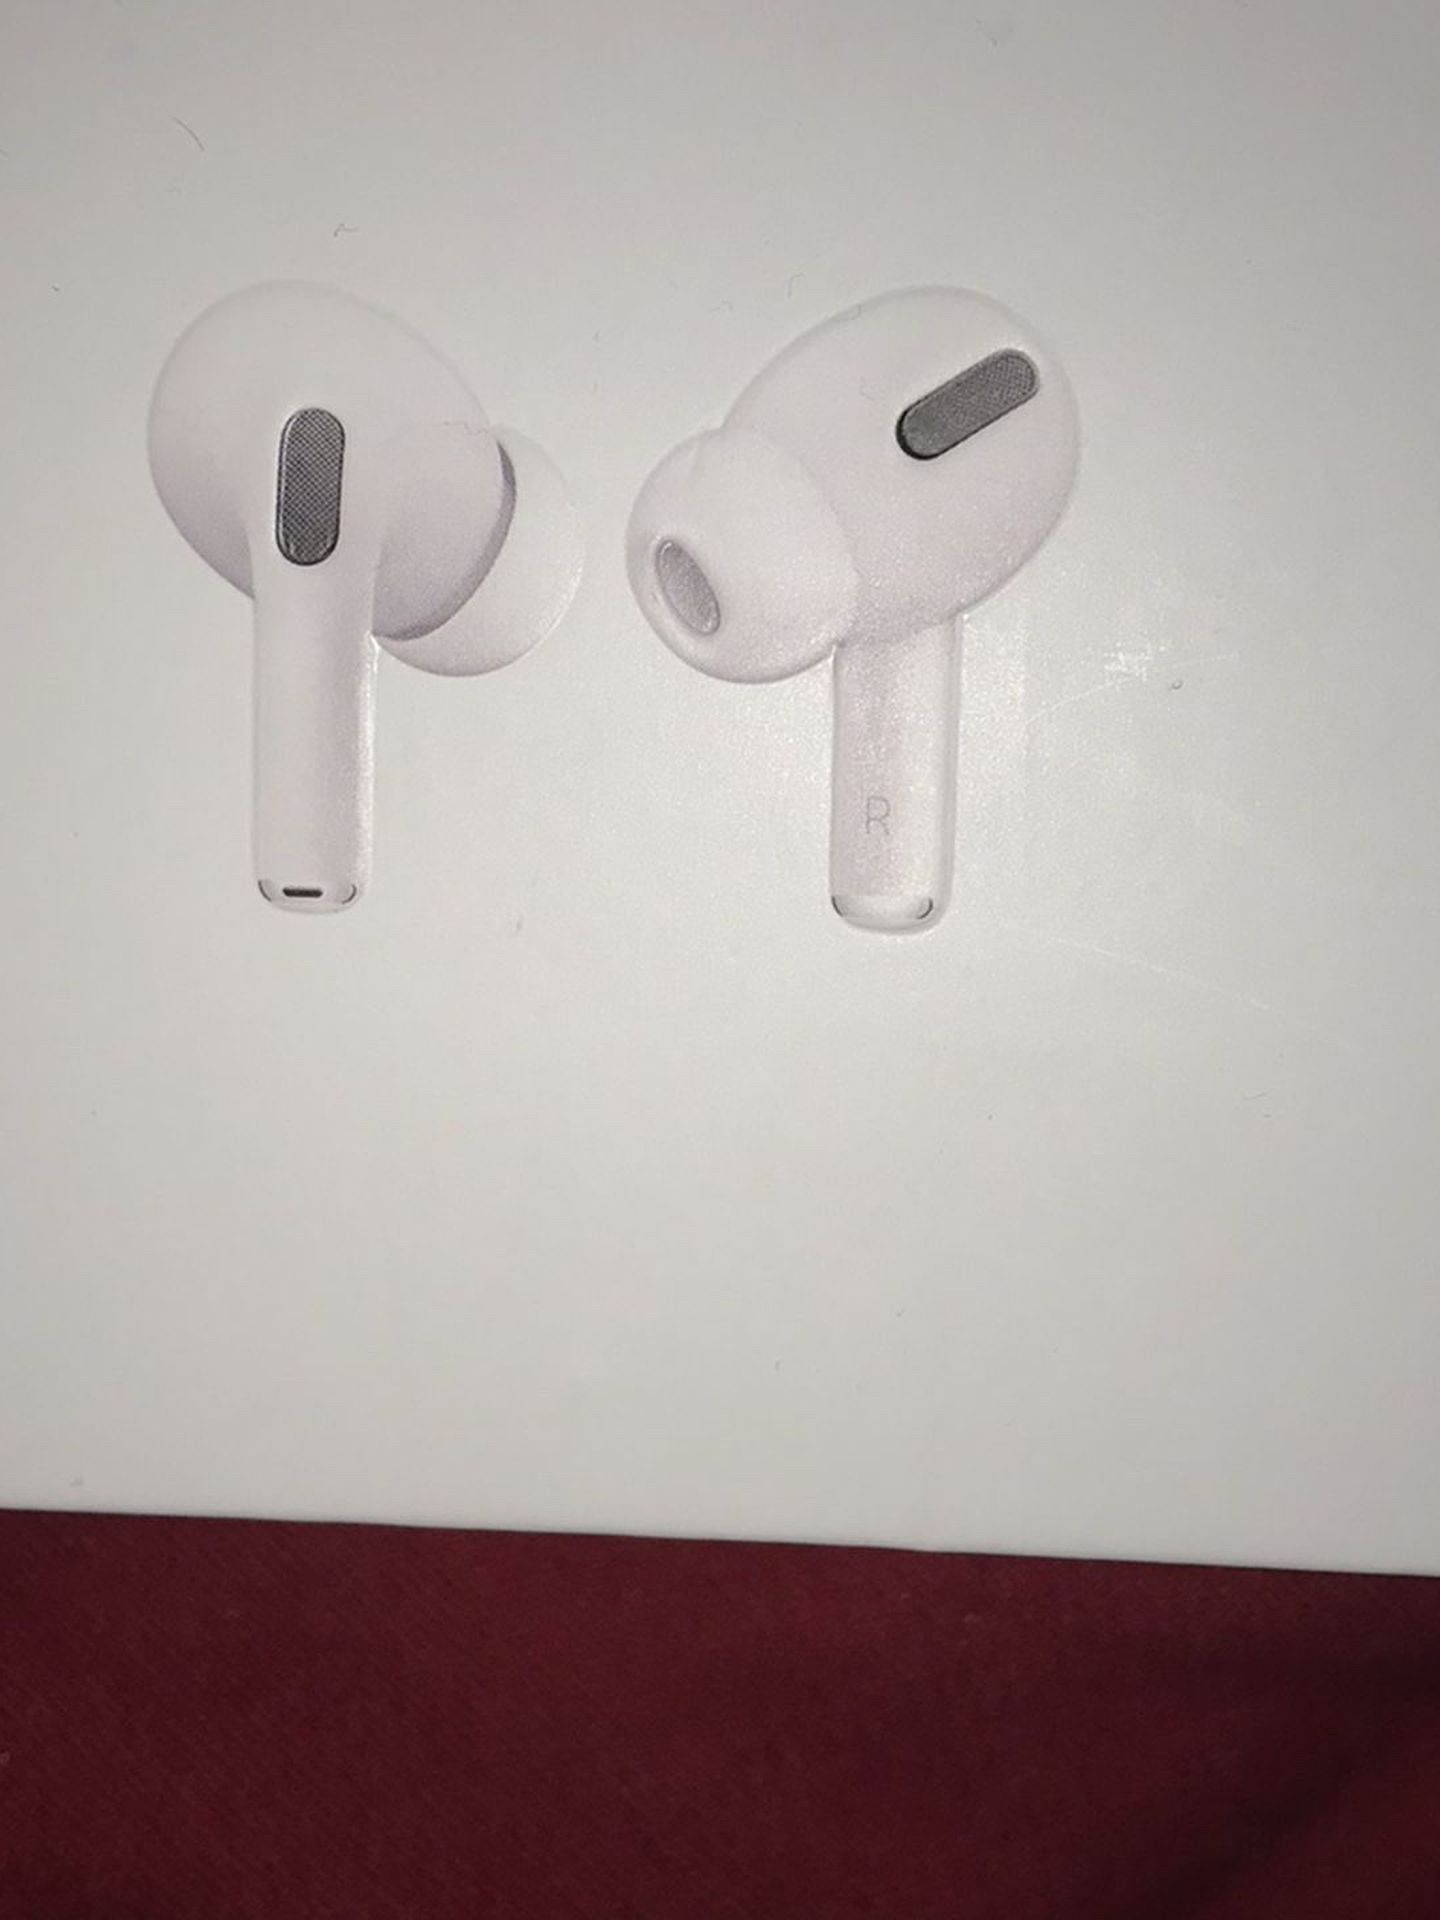 Like New Apple Air Pods Pro